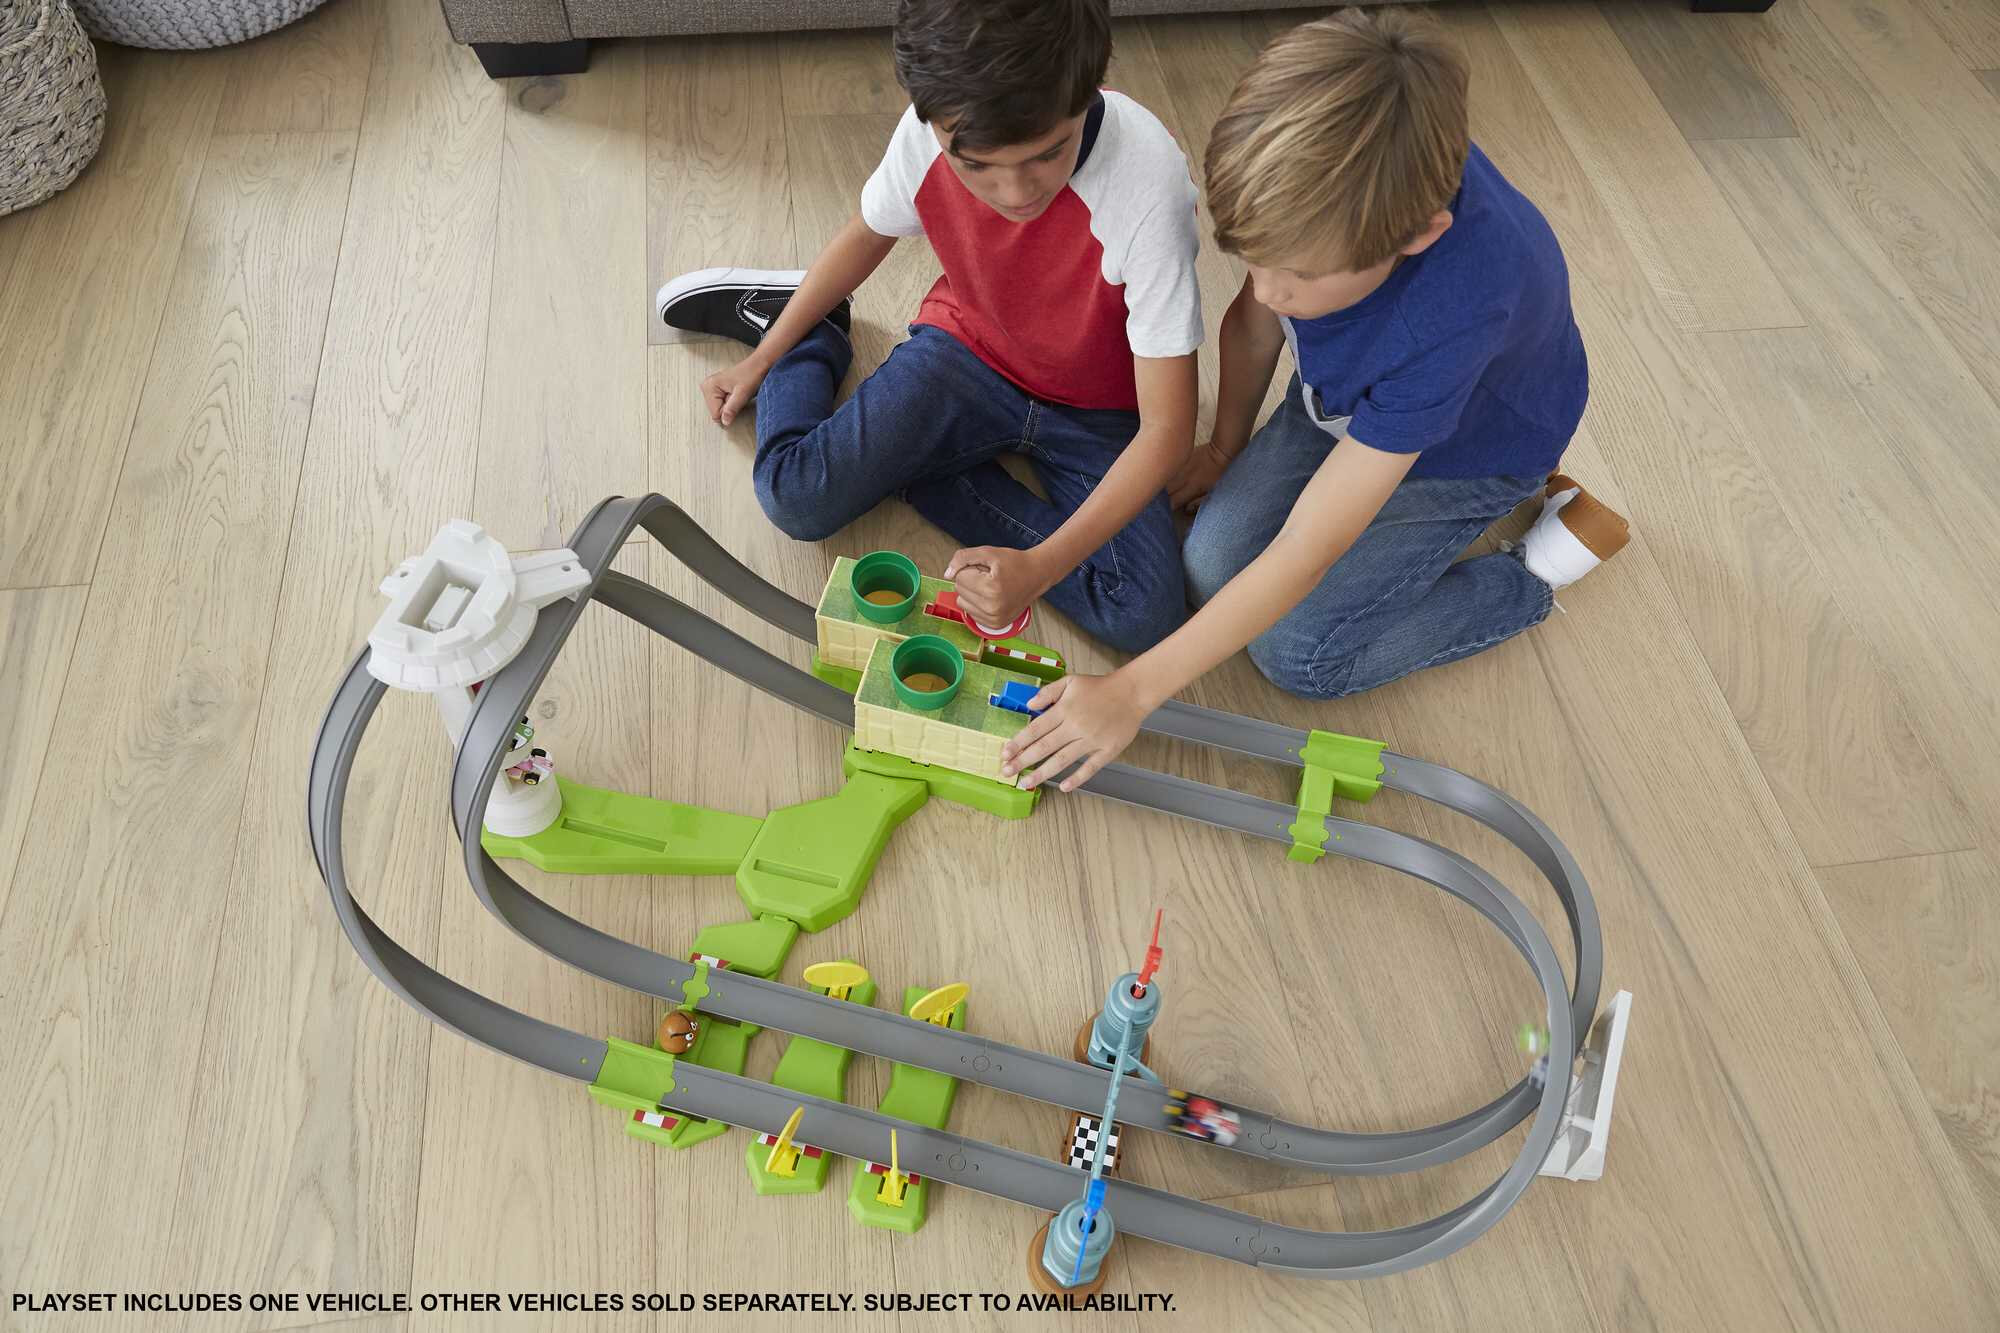 Hot Wheels Mario Kart Circuit Lite Track Set with 1:64 Scale Toy Die-Cast Kart Vehicle & Launcher - image 3 of 7